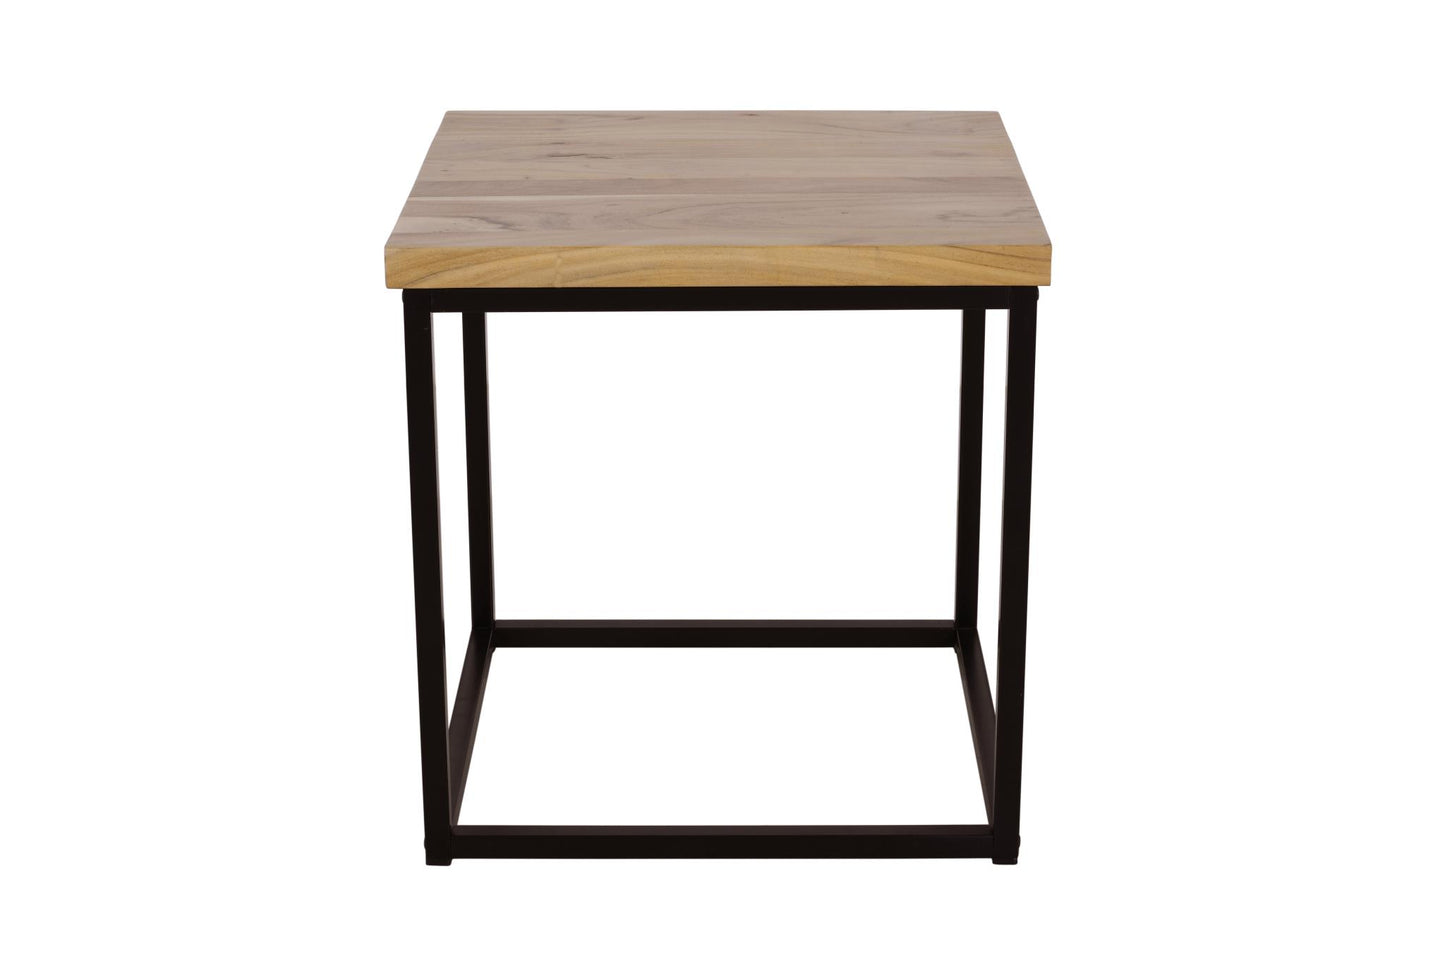 Ames Chairside Table